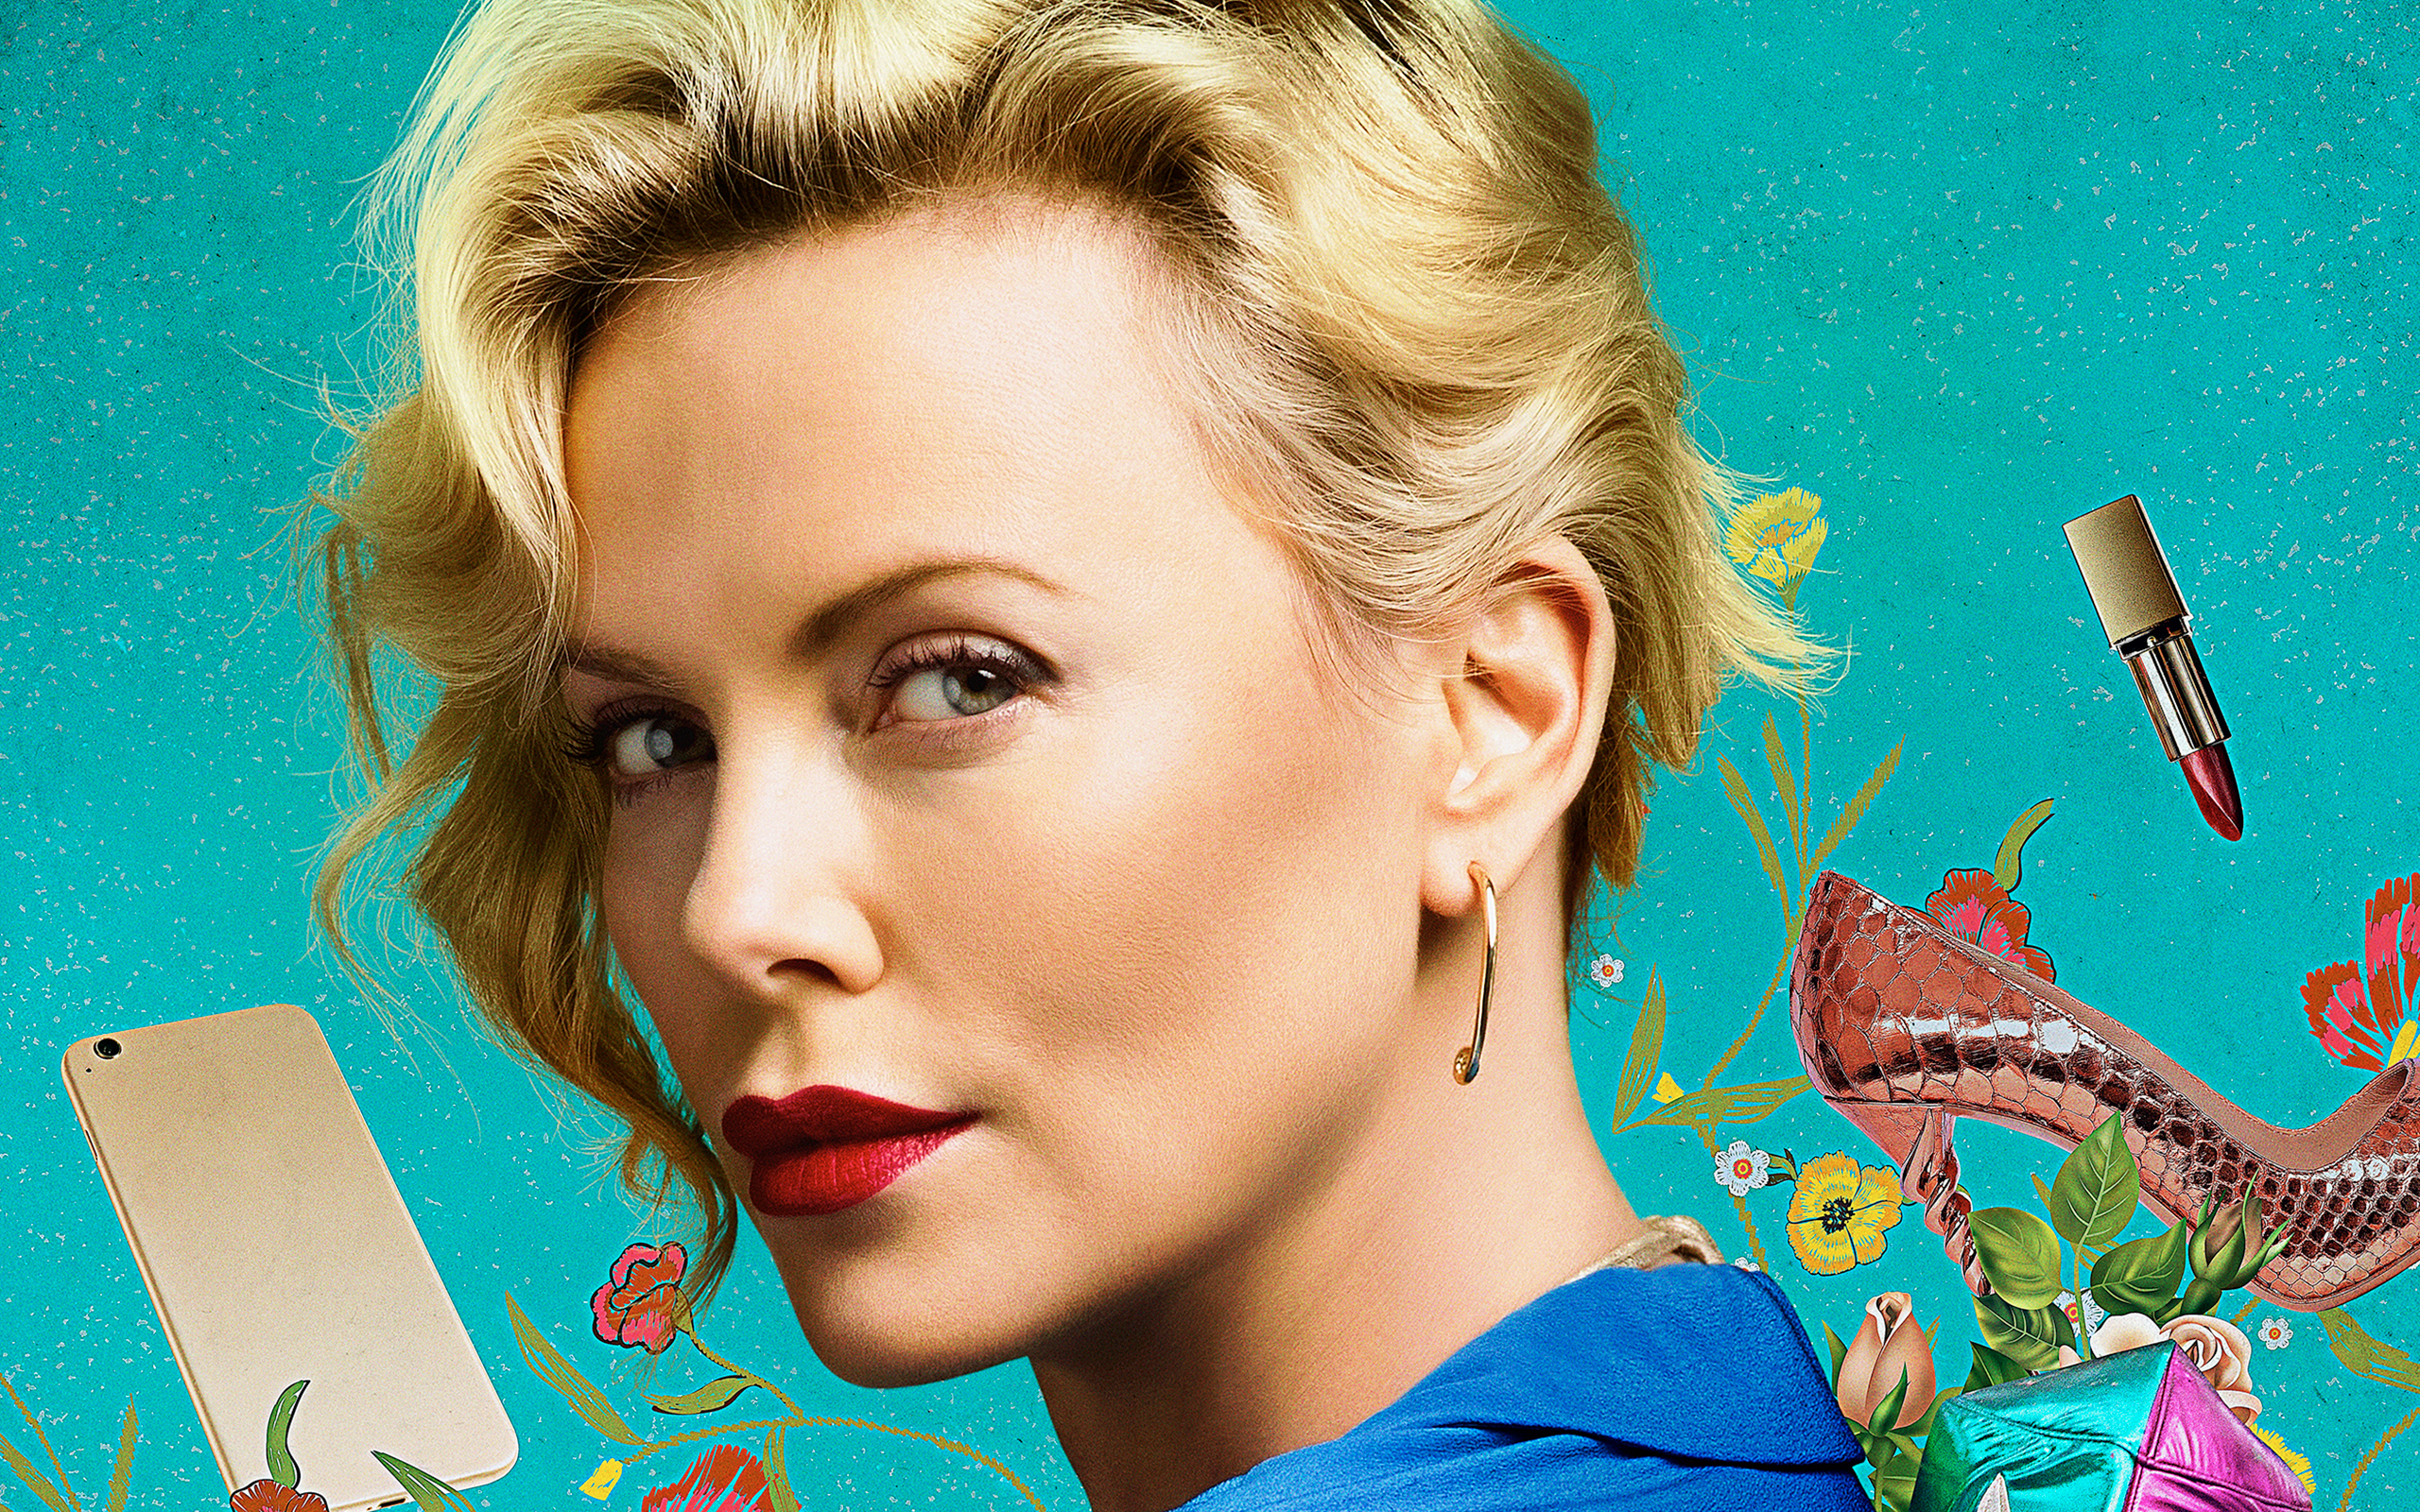 charlize theron speaking afrikaans movie torrent